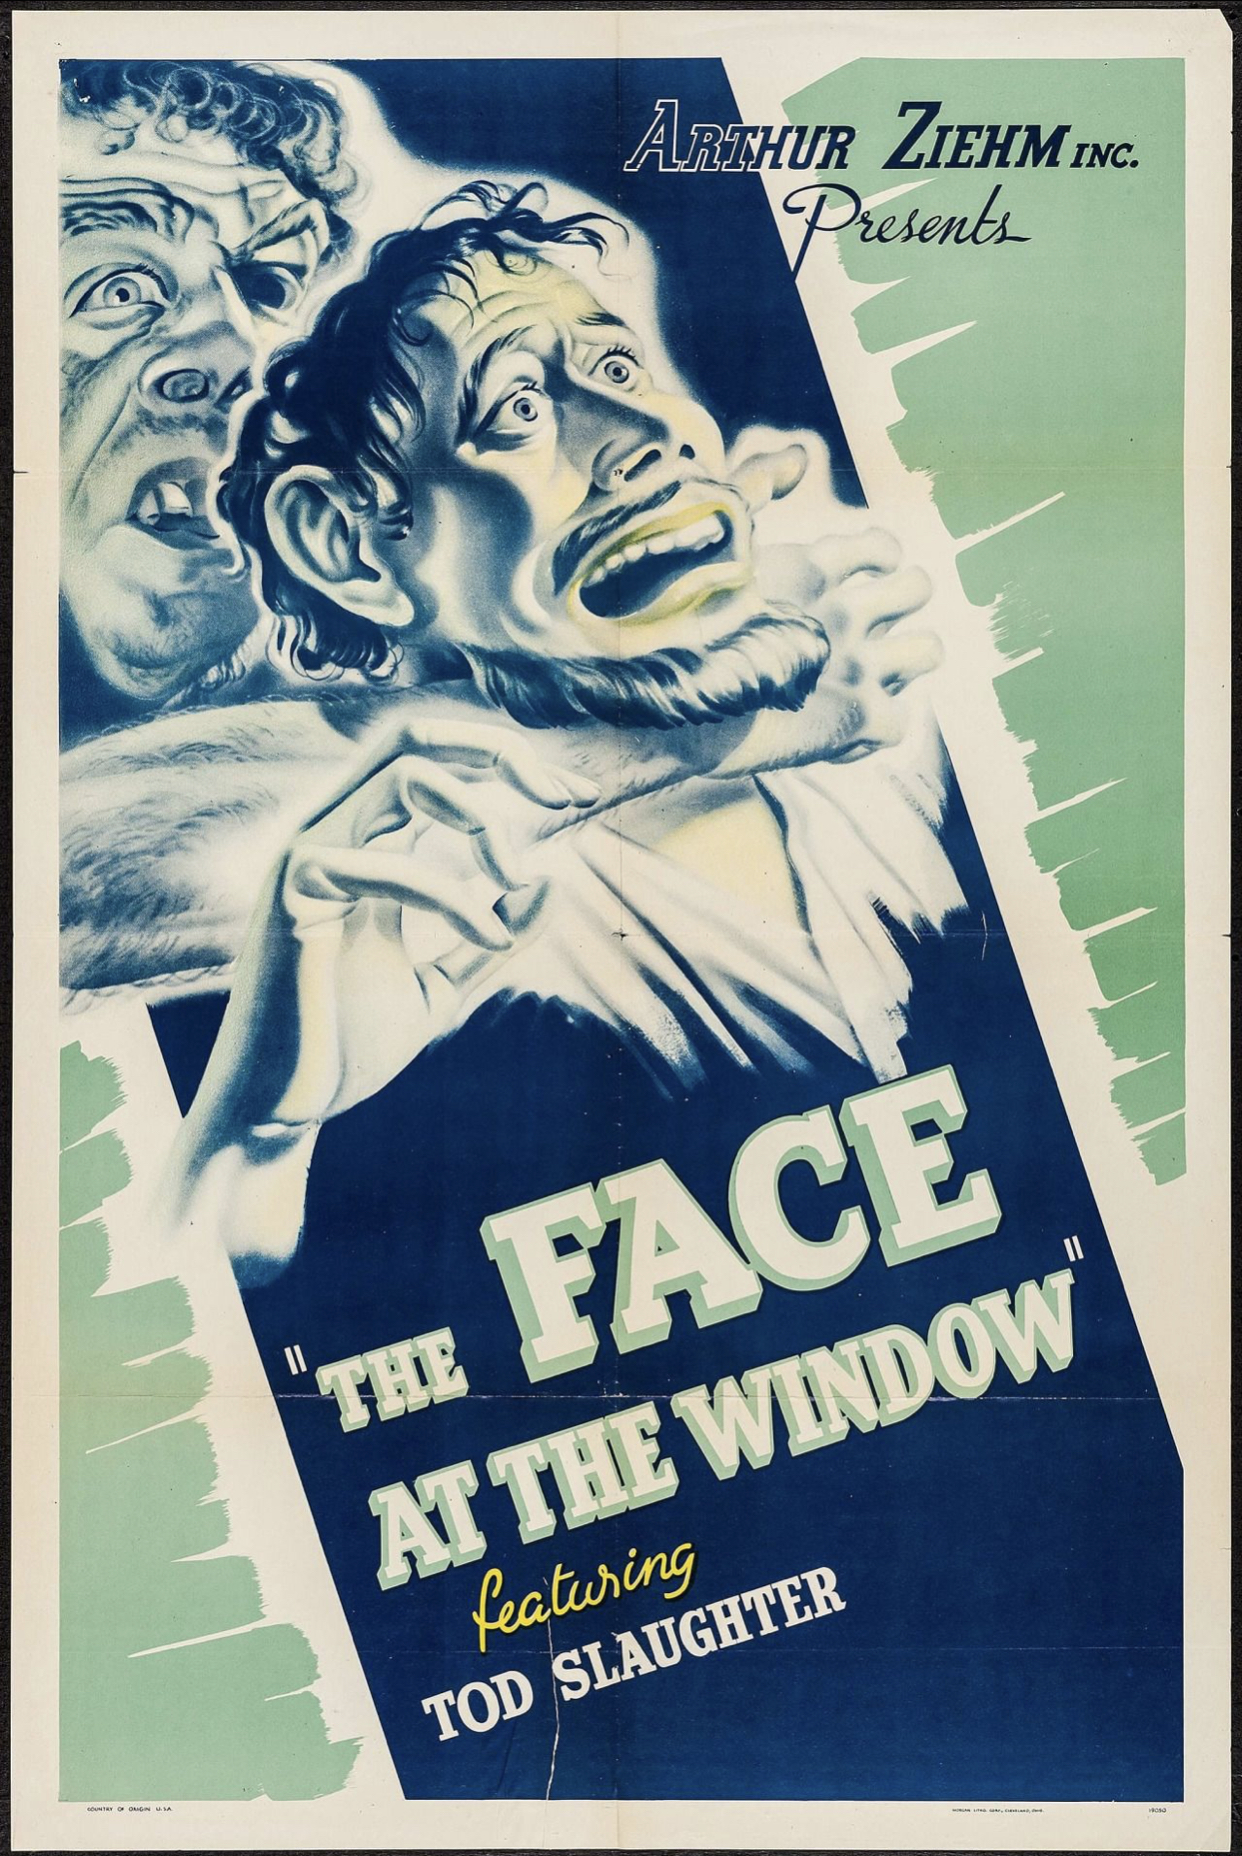 The Face at the Window (1939) starring Tod Slaughter on DVD on DVD